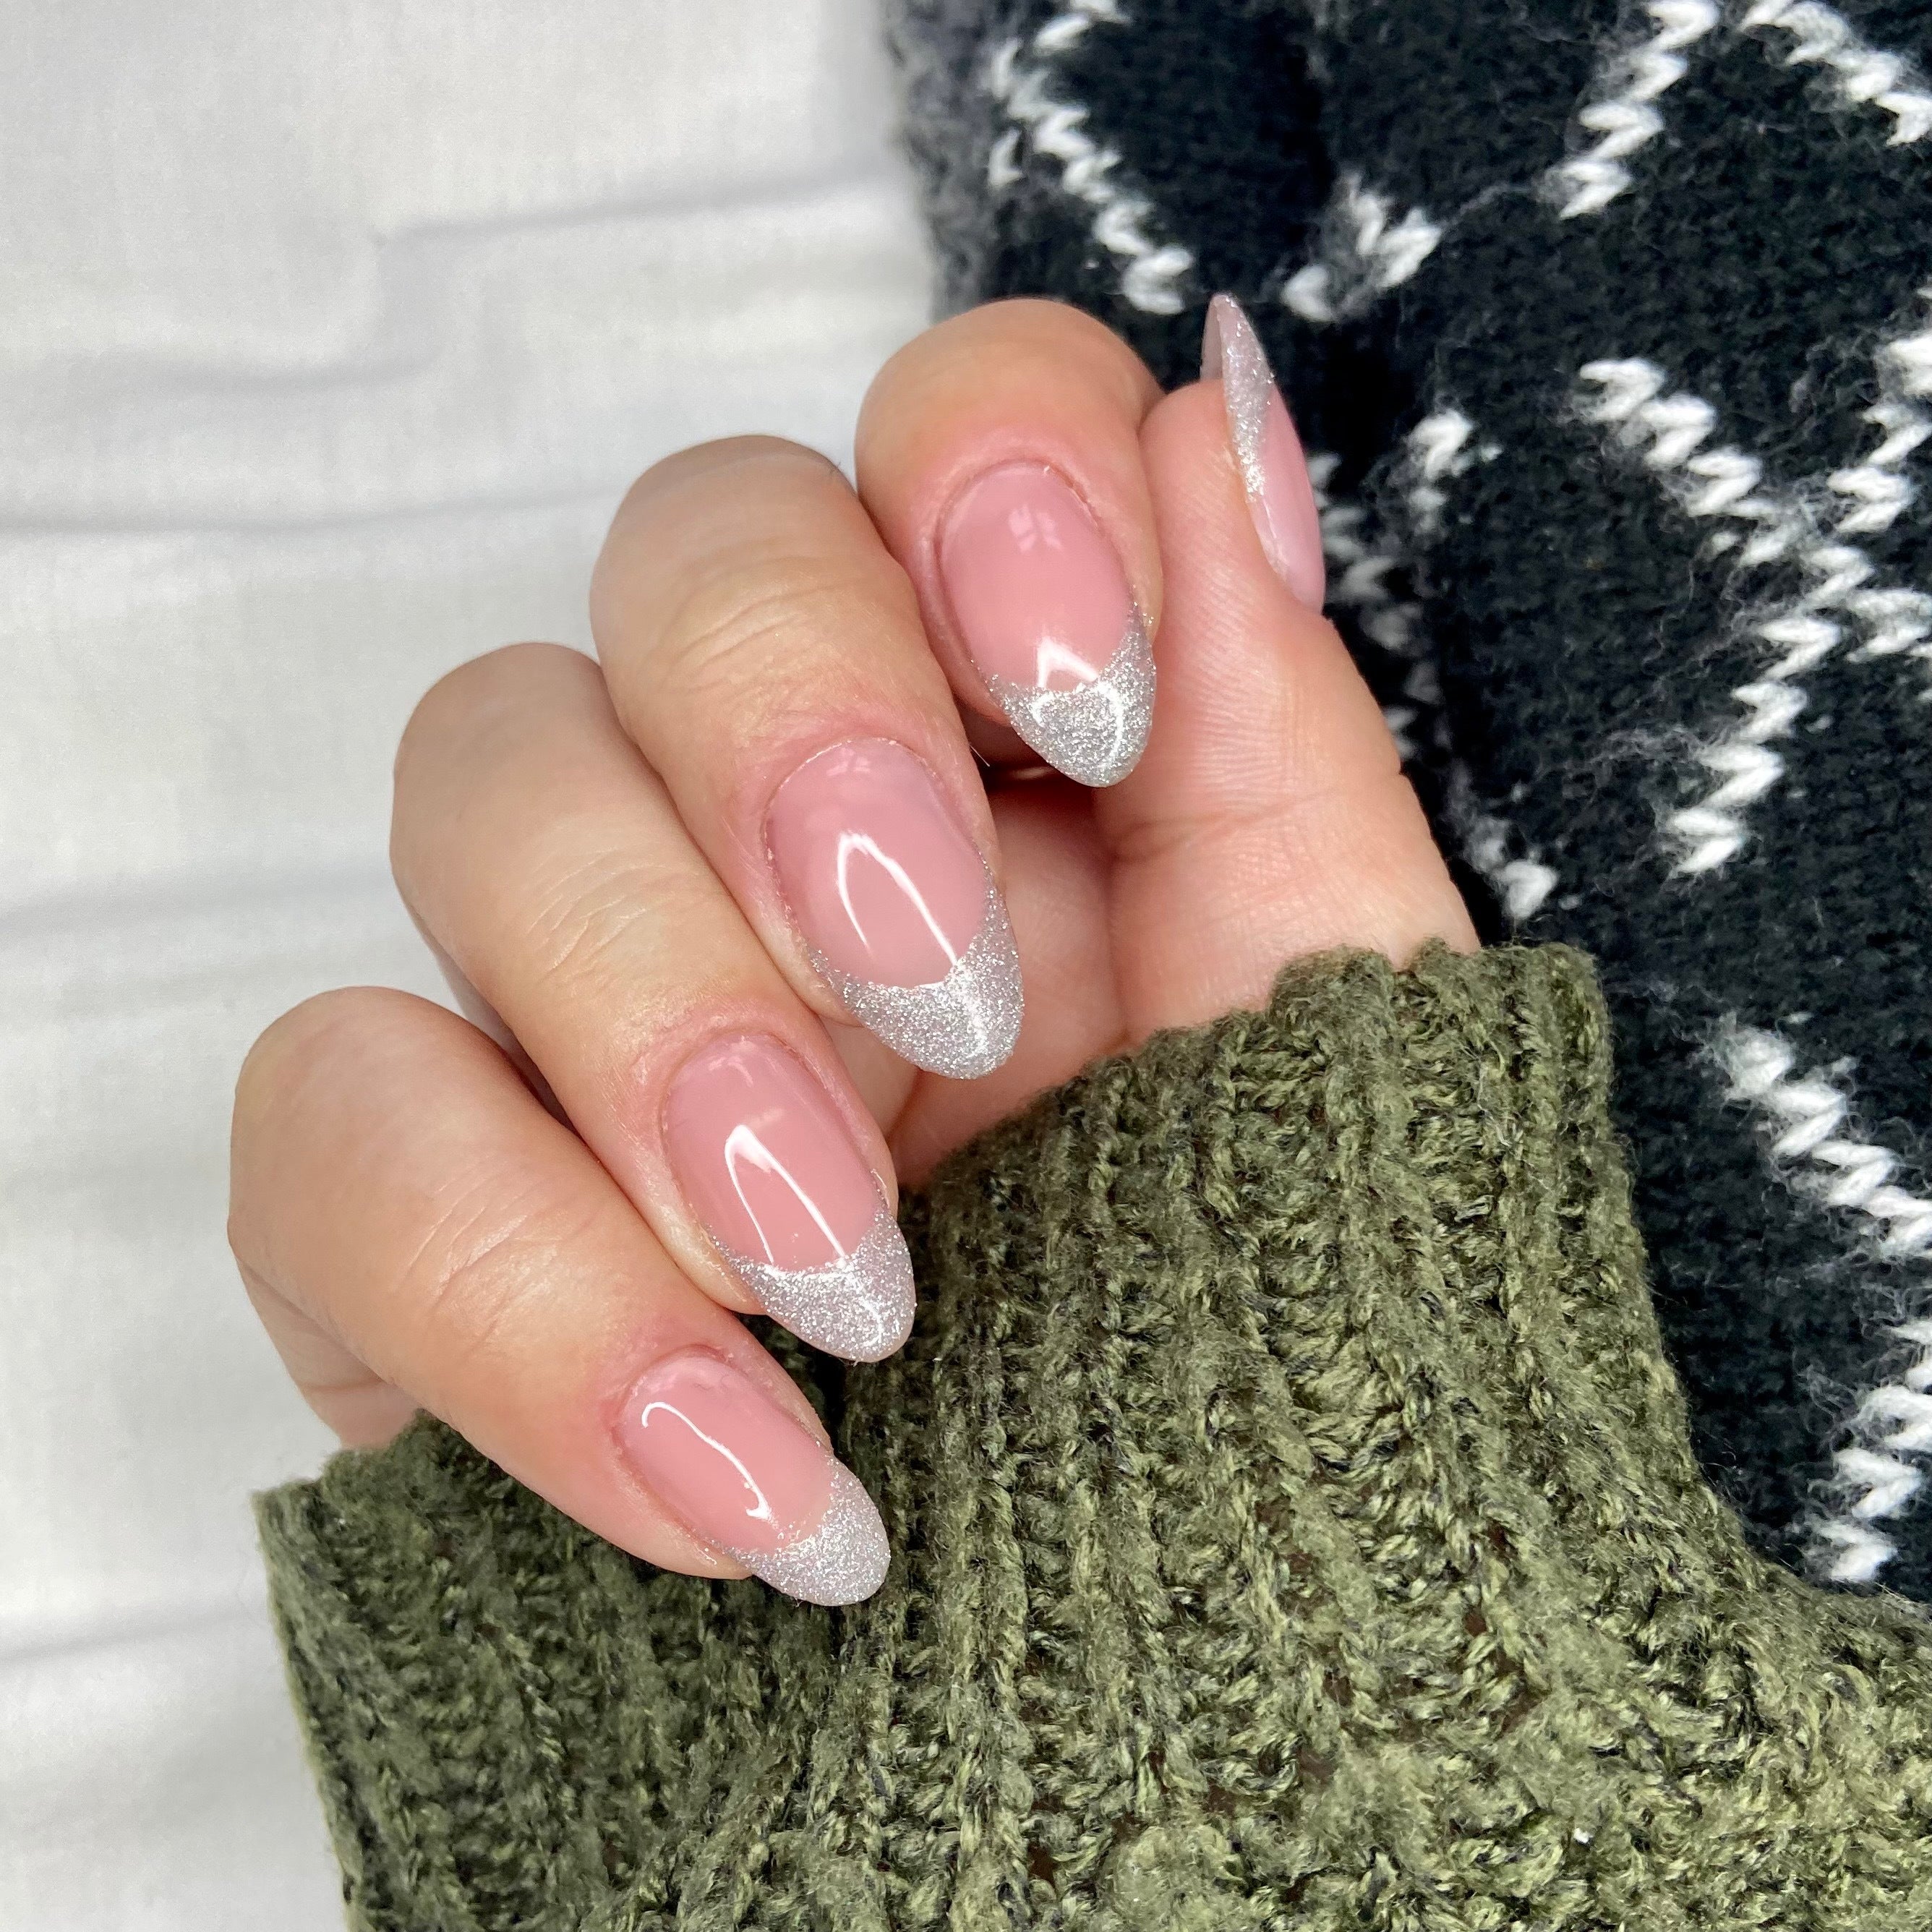 Replacement Nails – So Pressious